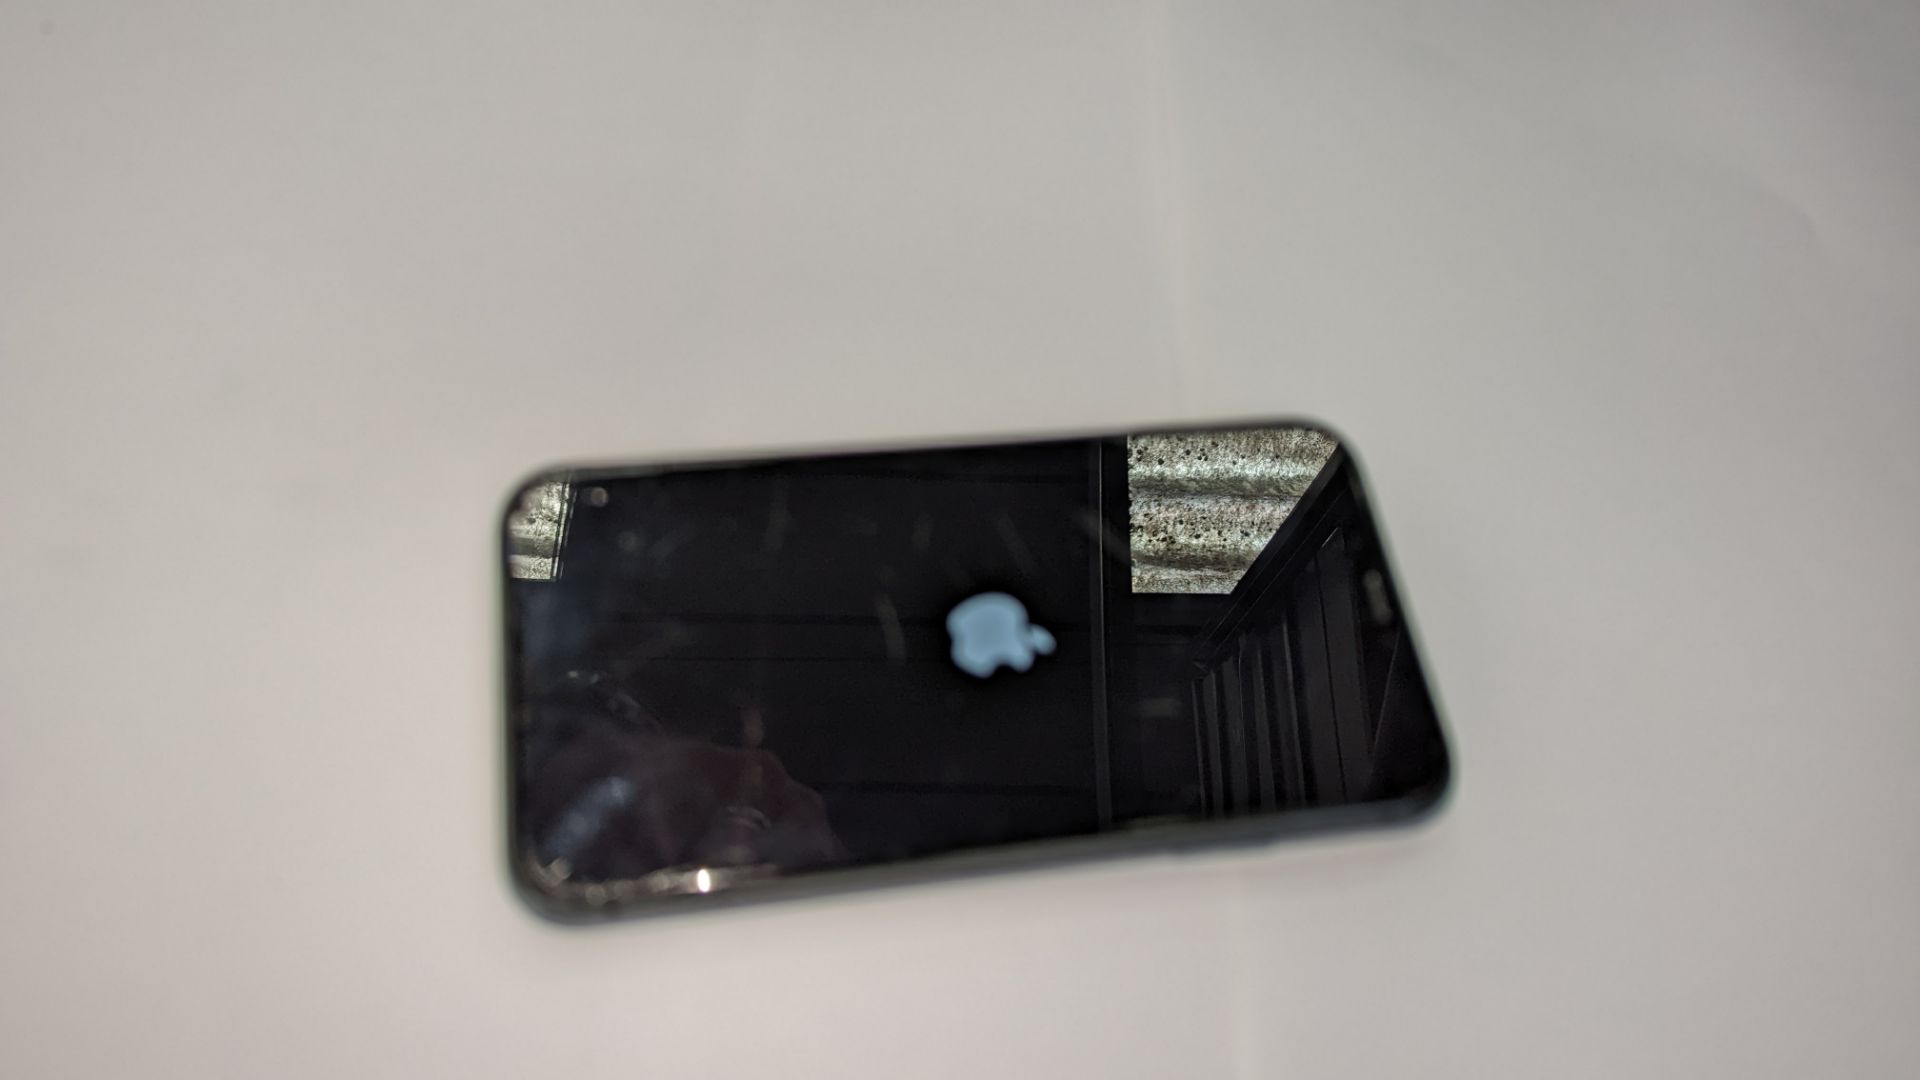 Apple iPhone 11, 64GB capacity, model A2221 (MWLT2B/A). NB1 damage/crack to screen. NB2 no box - Image 13 of 16